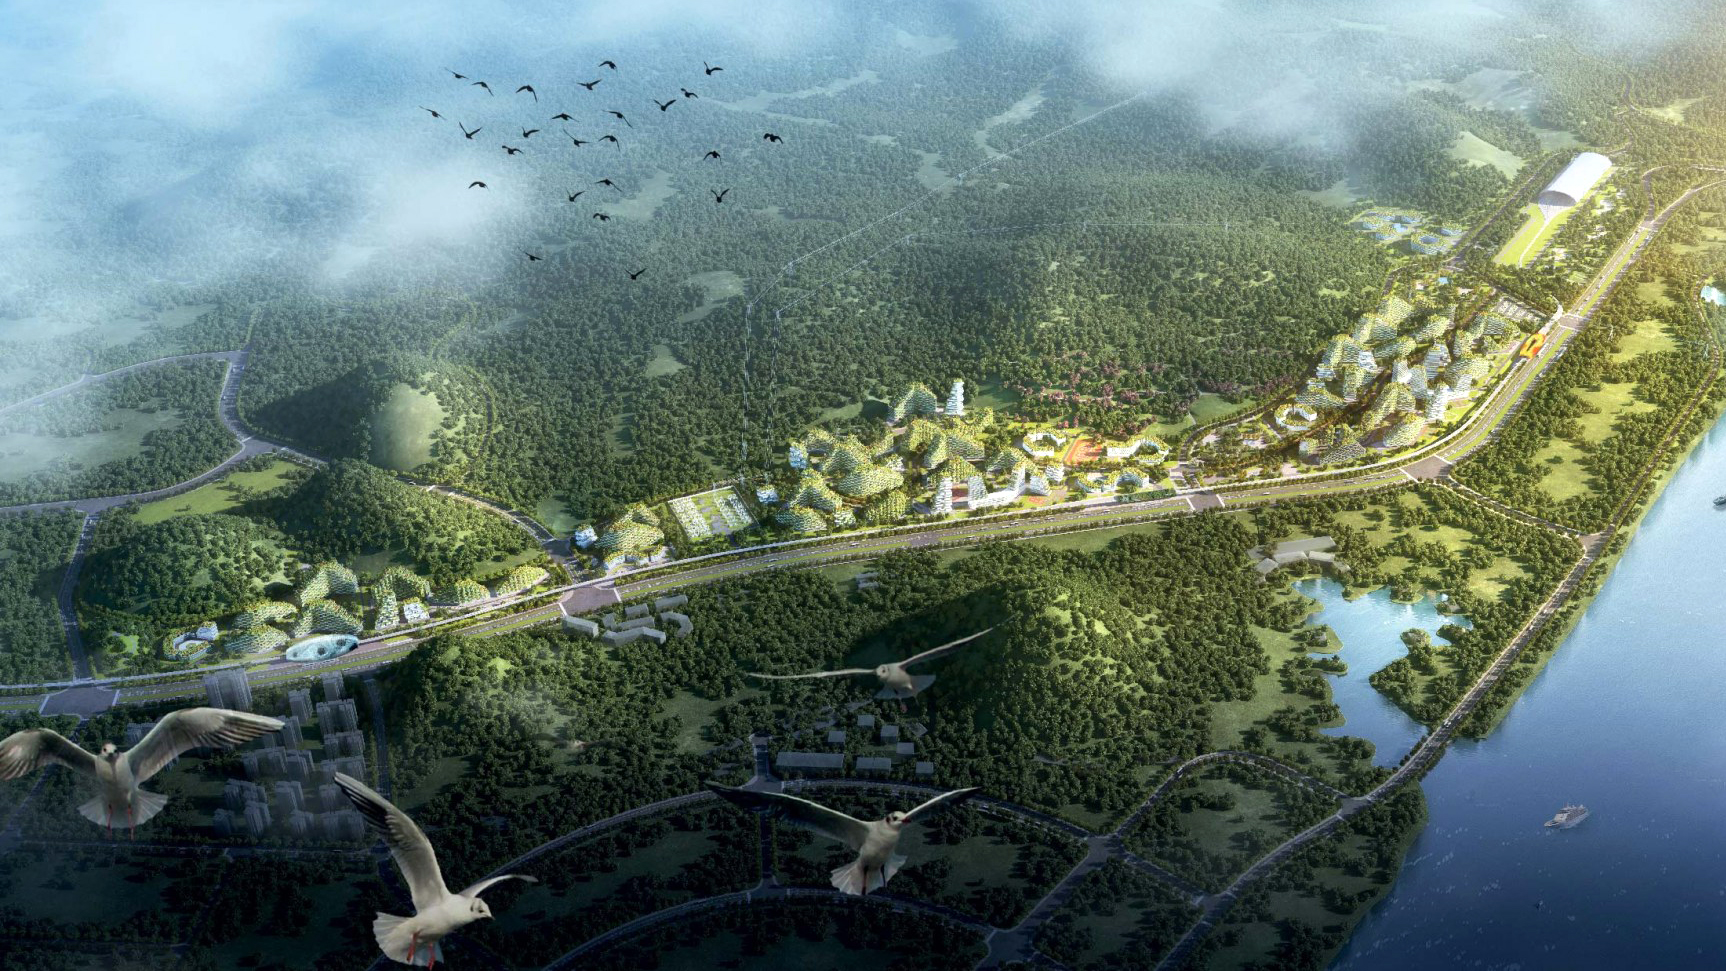 Liuzhou Forest City millions of plants for a new model of 